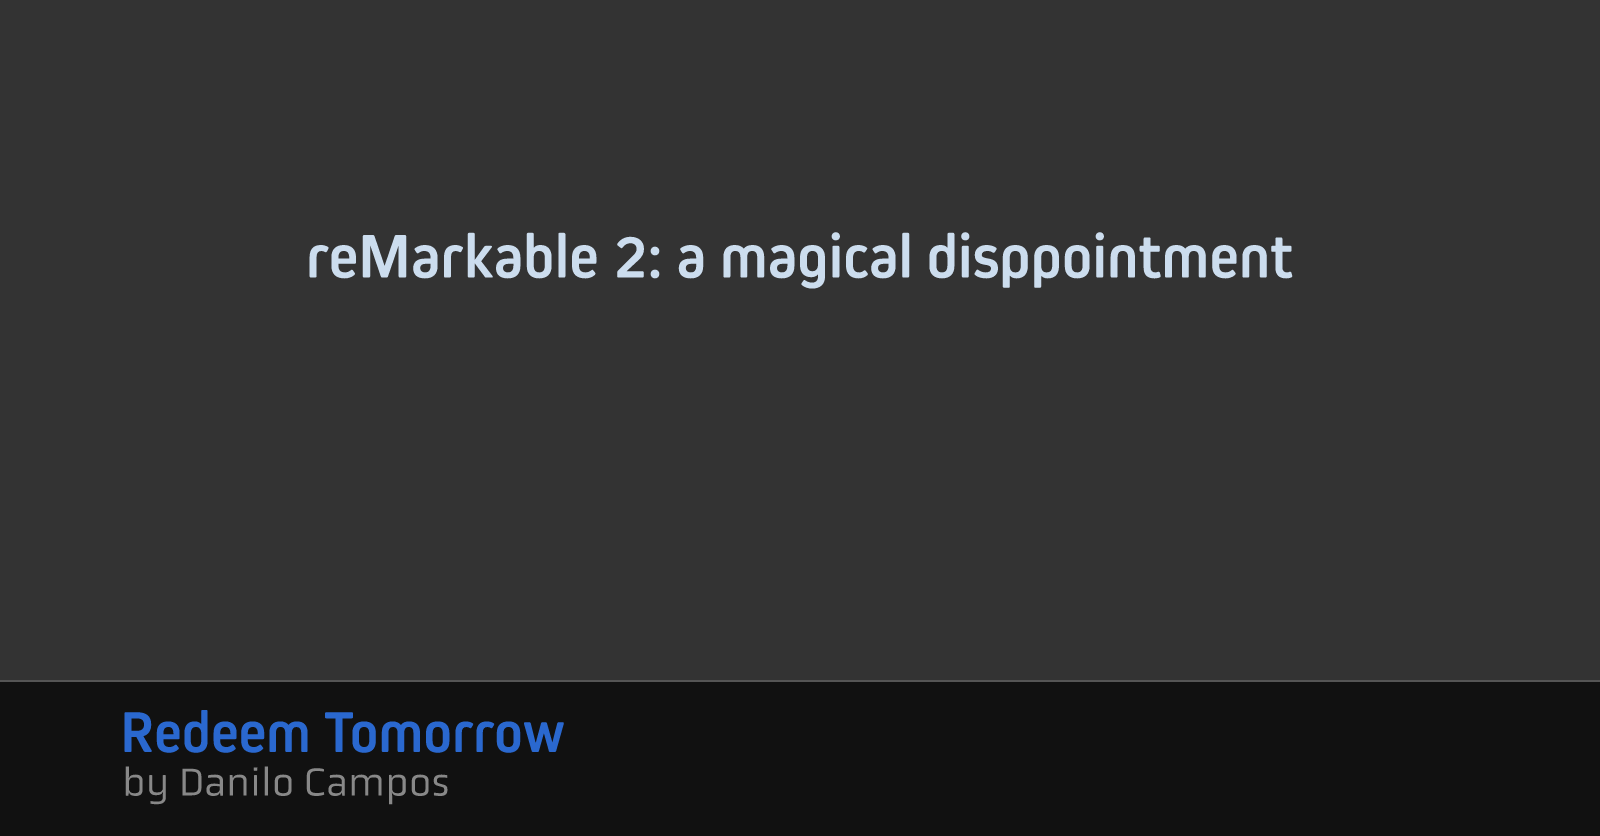 reMarkable 2: a magical disppointment